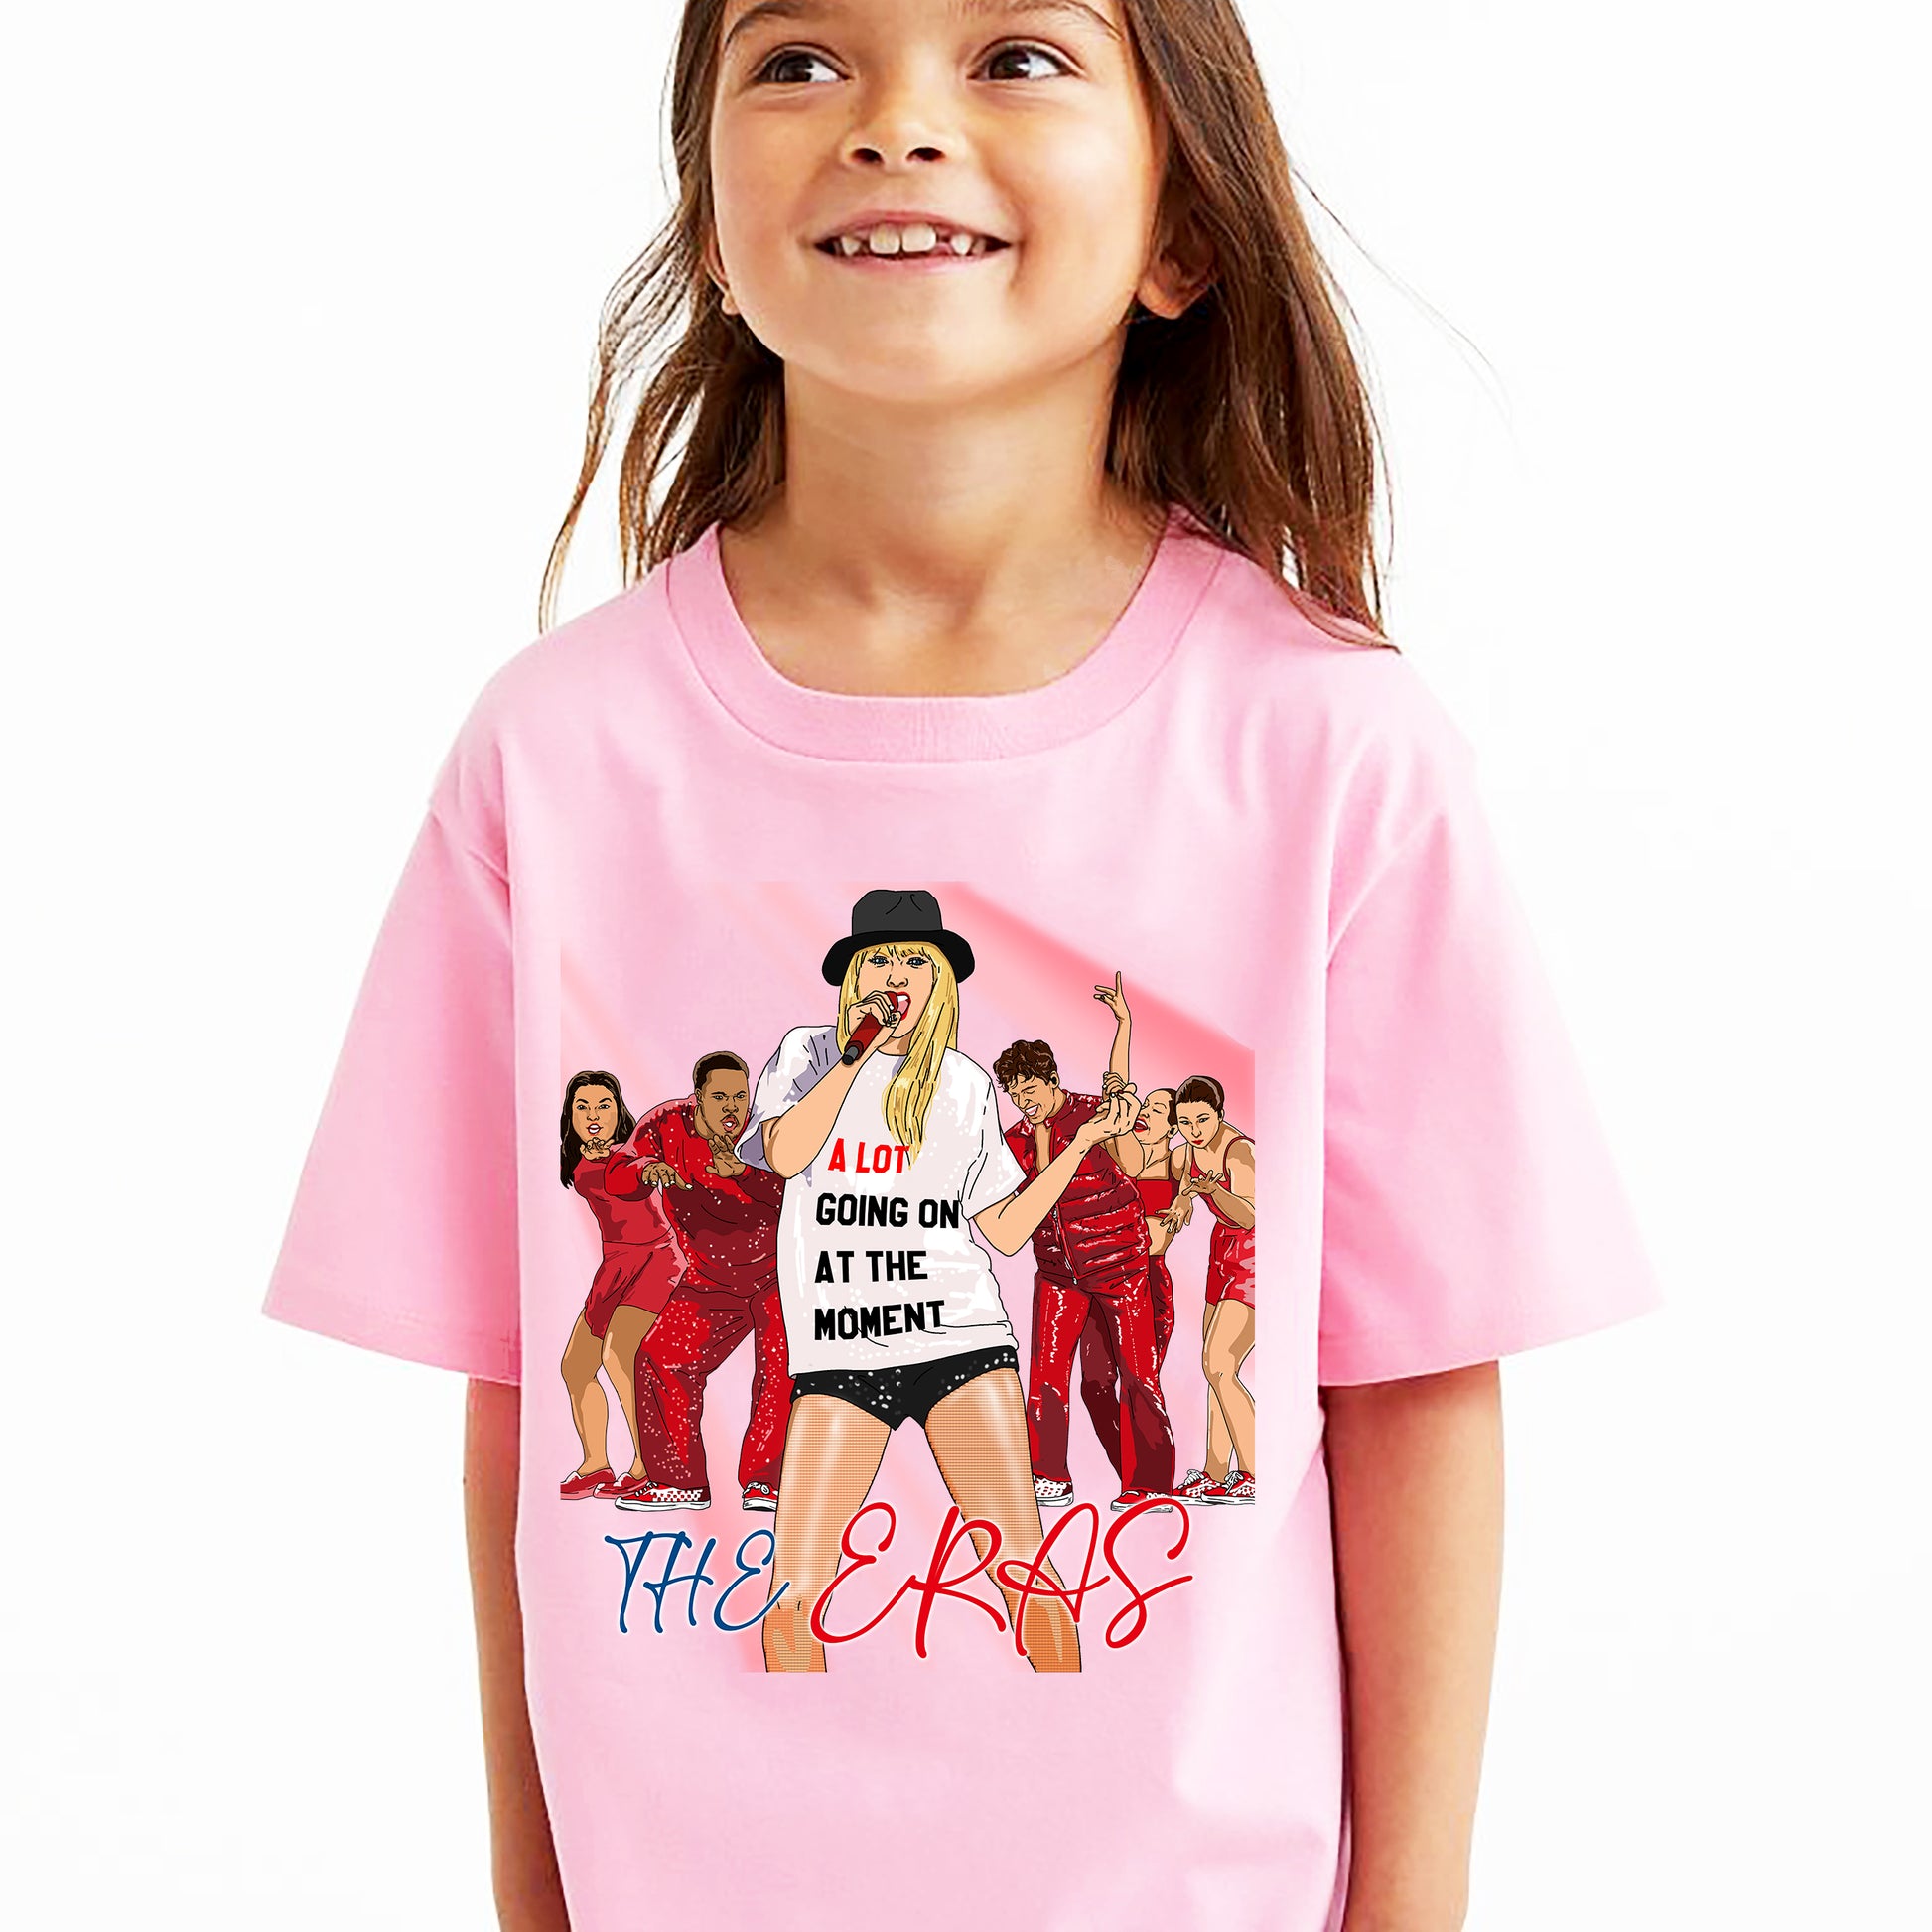 Taylor Swift Clothing for Kids